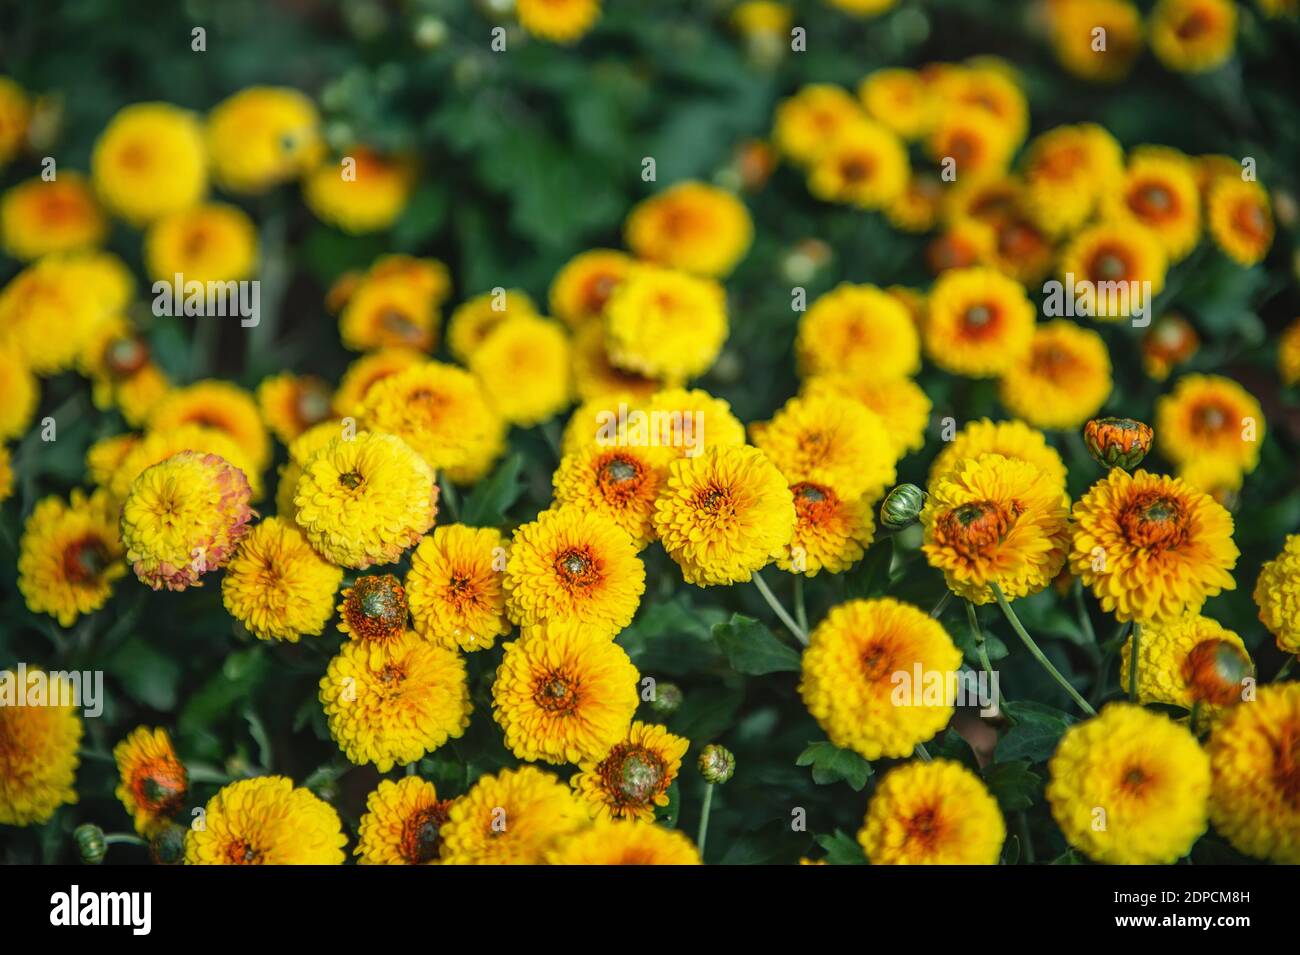 yellow and orange small chrysanthemums on a blurry background. In autumn, beautiful bright dense chrysanthemum bushes bloom luxuriantly in the garden. Stock Photo